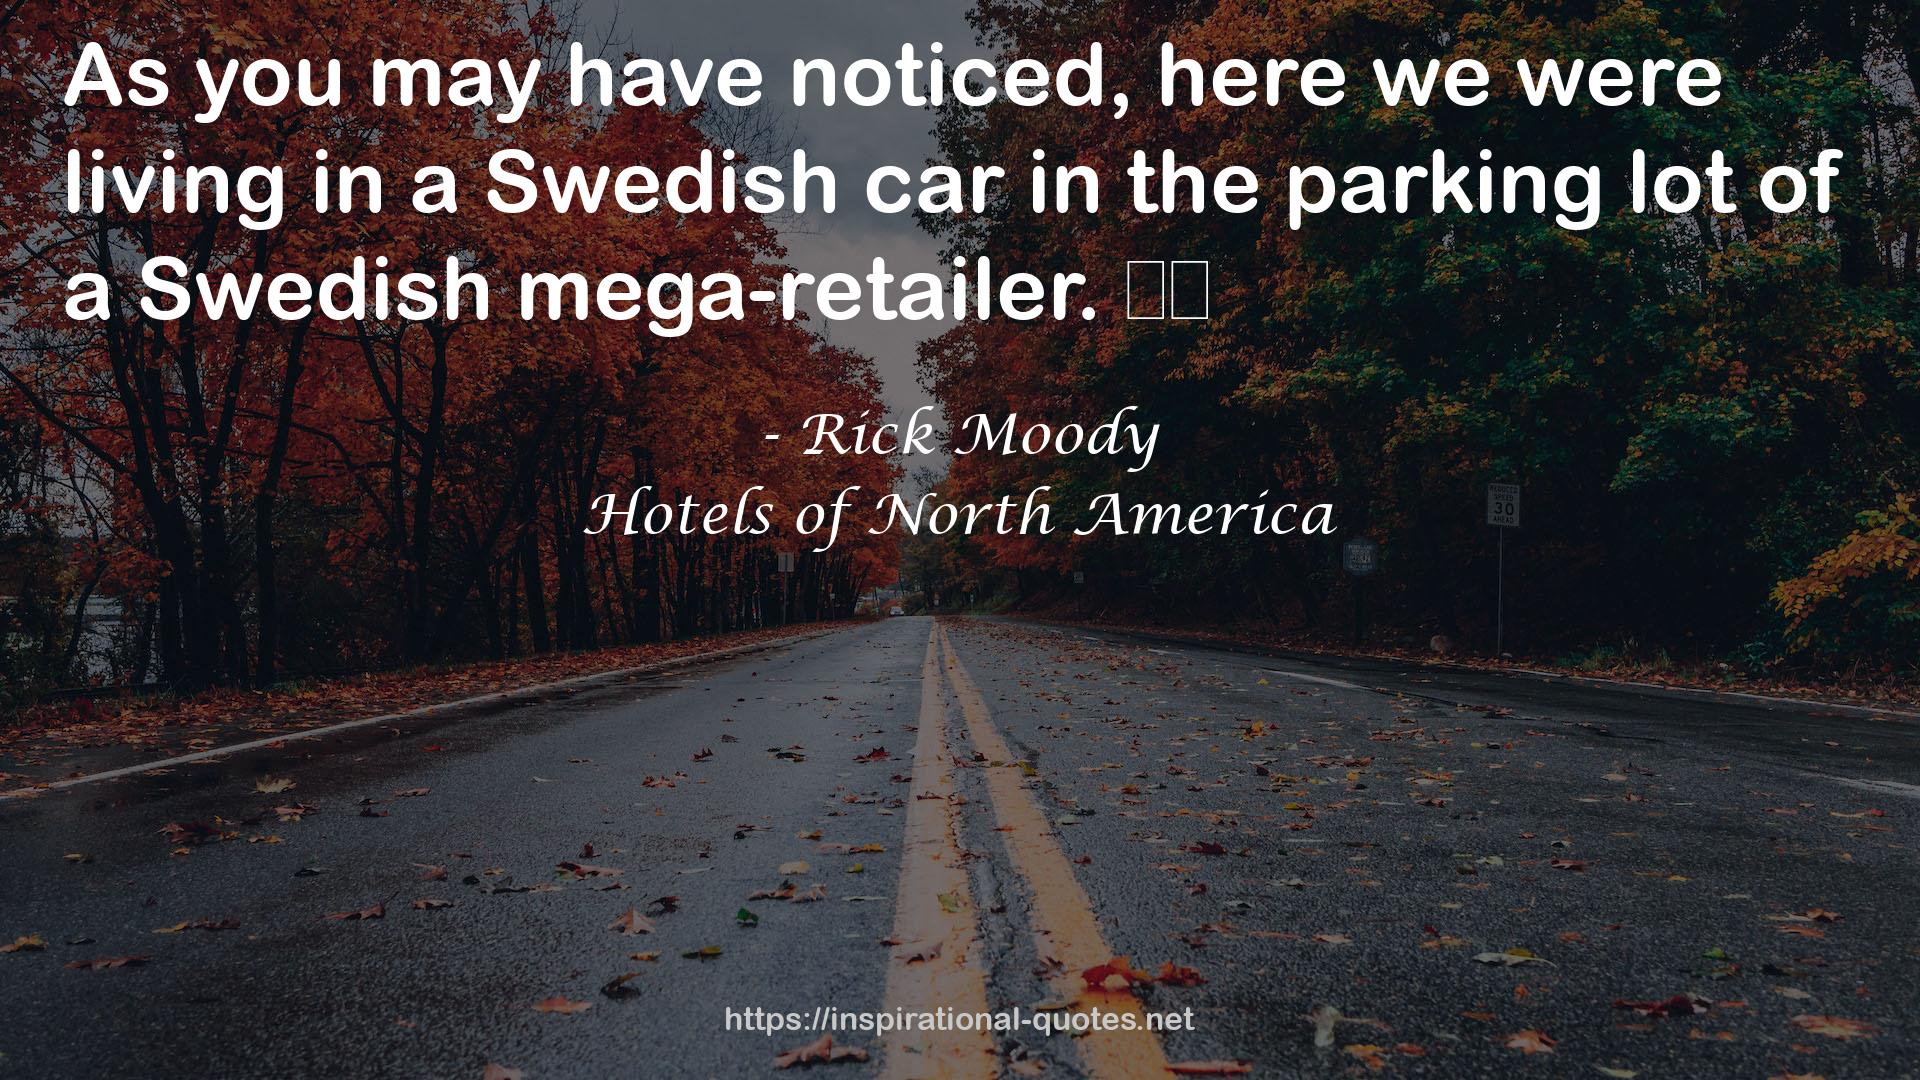 Hotels of North America QUOTES